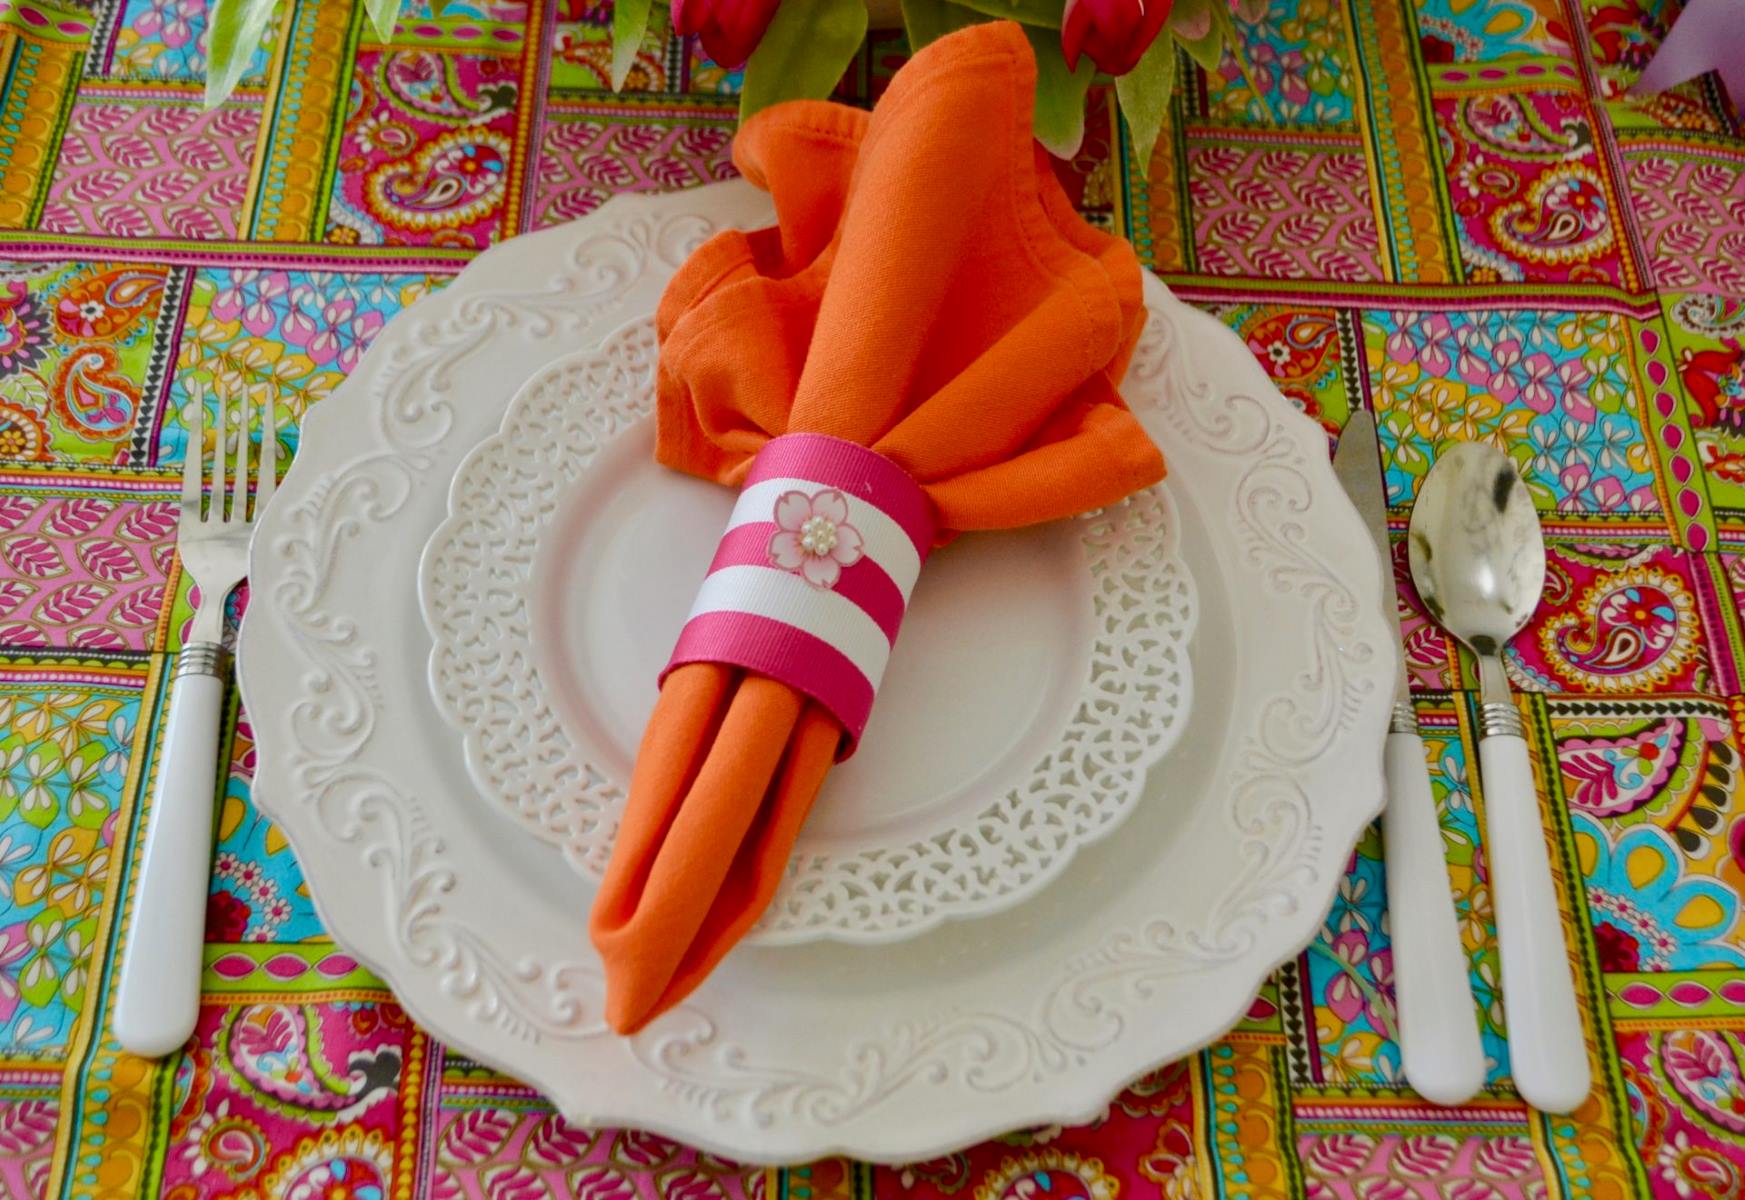 How To Make Napkin Rings Out Of Ribbon